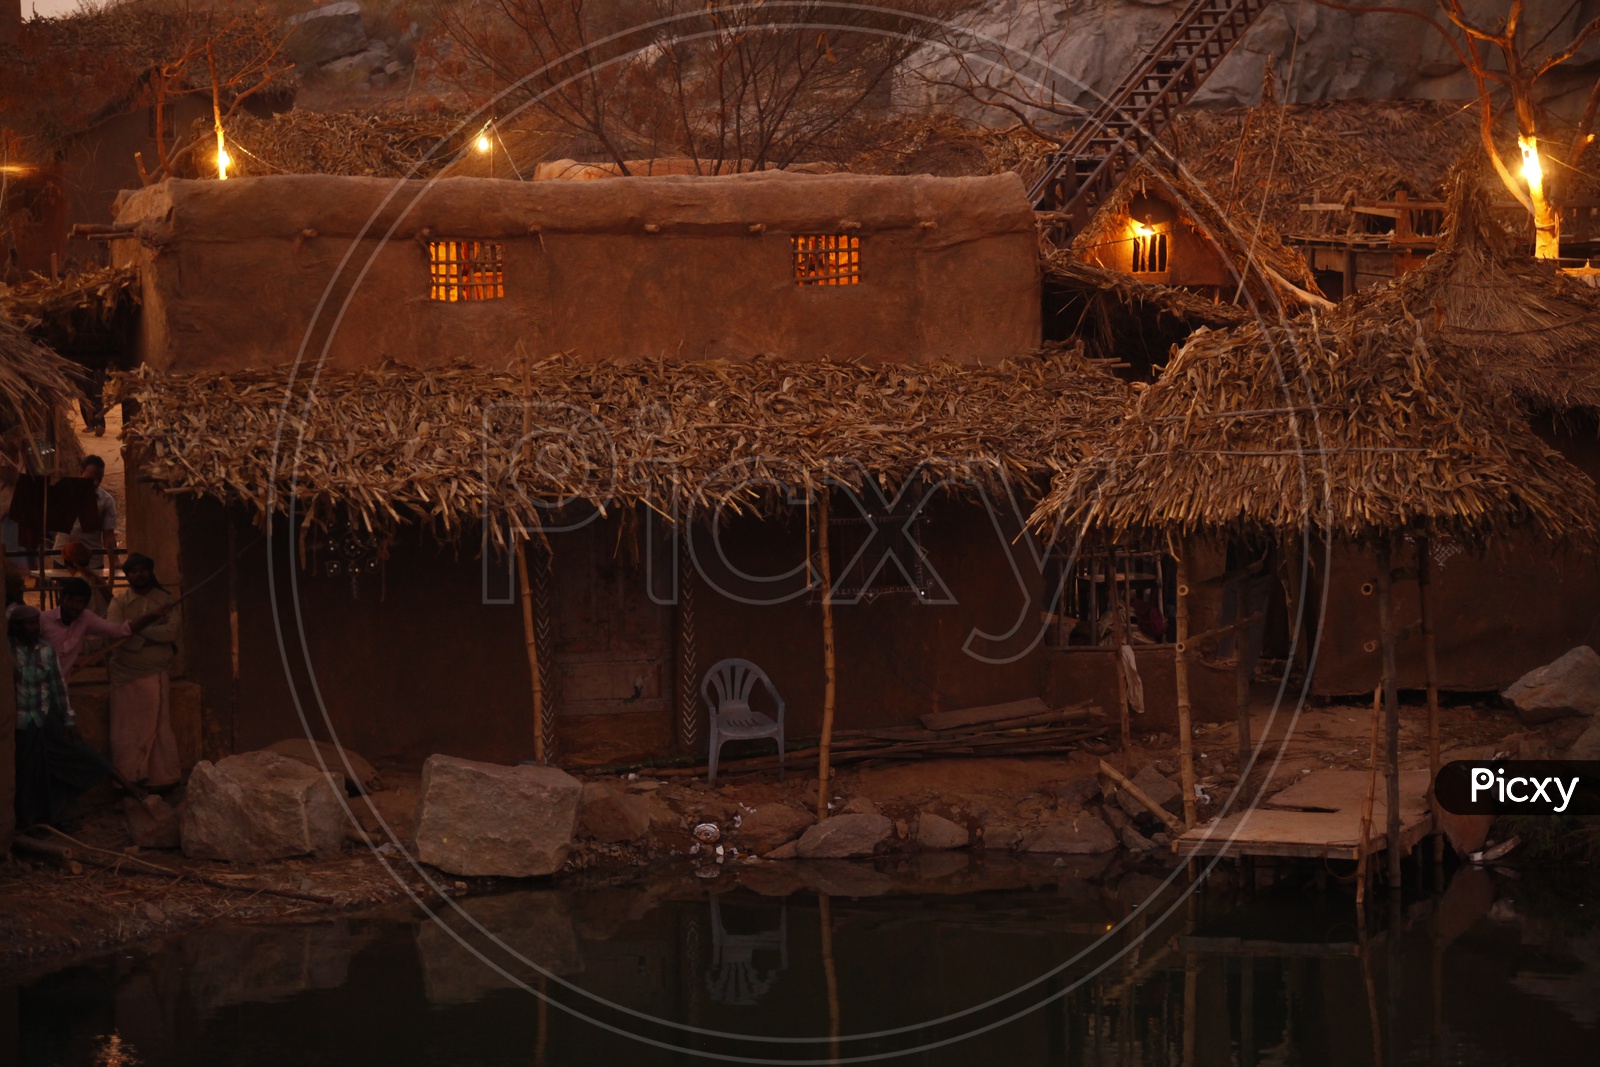 Thatched mud huts near a pond